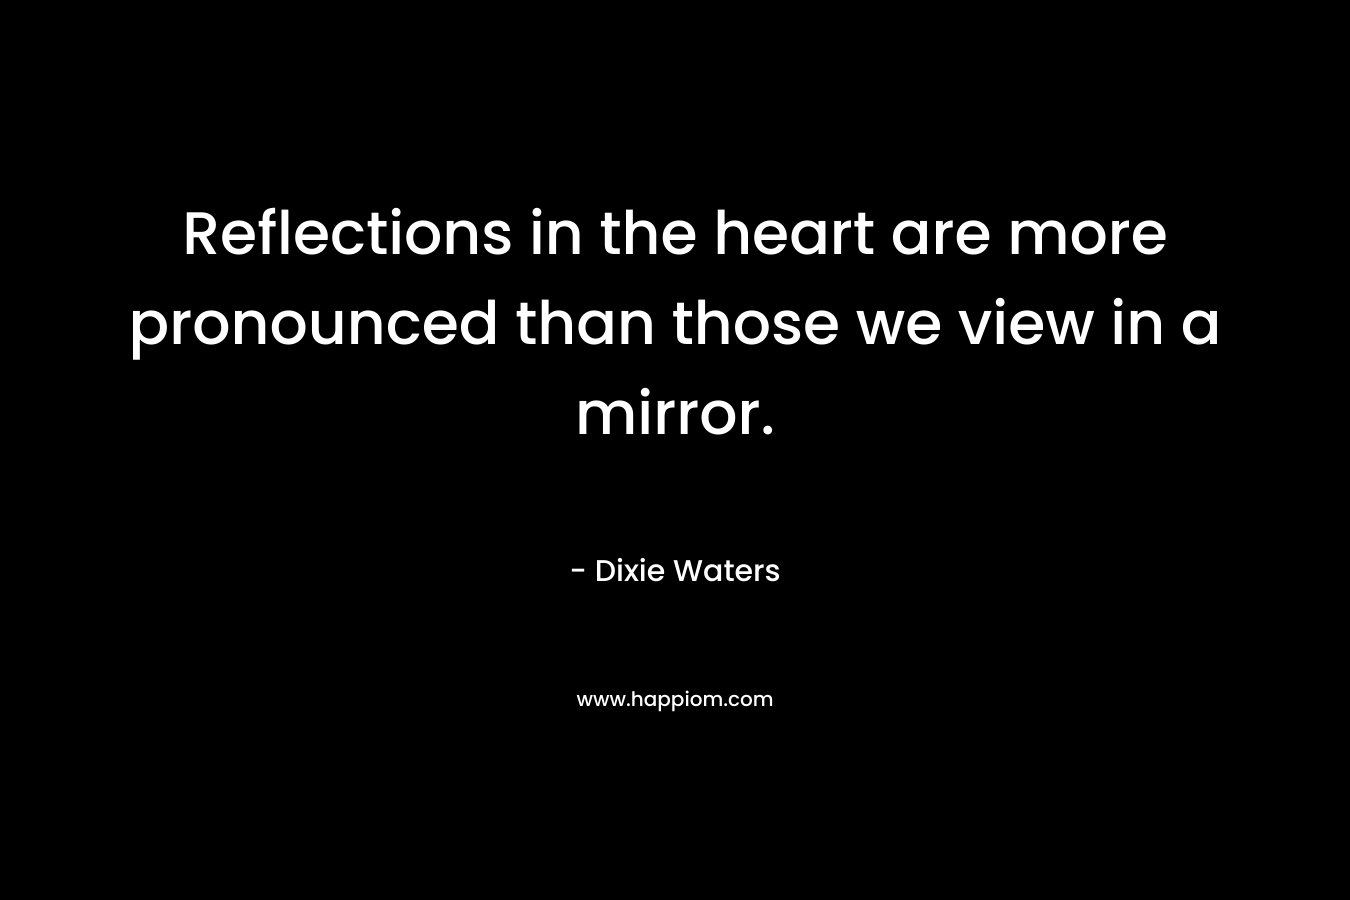 Reflections in the heart are more pronounced than those we view in a mirror.